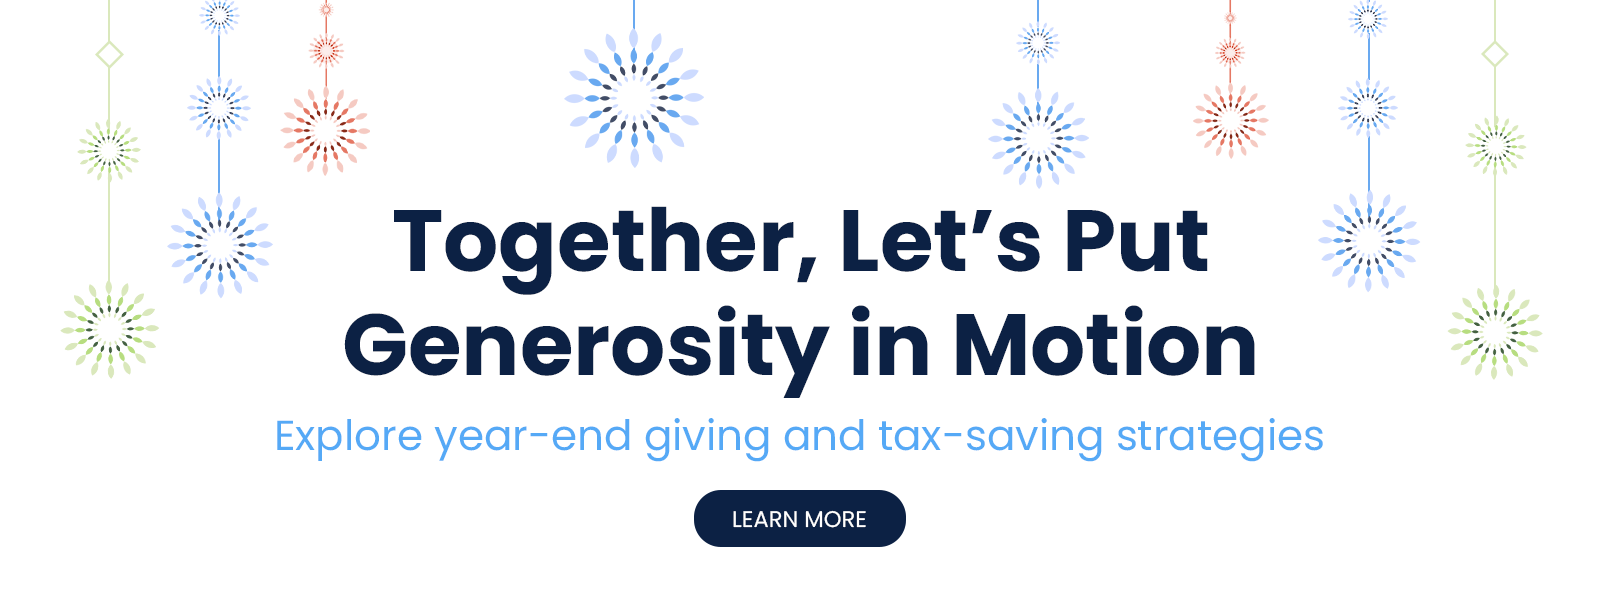 Graphic with text that reads: Together, Let's Put Generosity in Motion! Explore year-end giving and tax-saving strategies